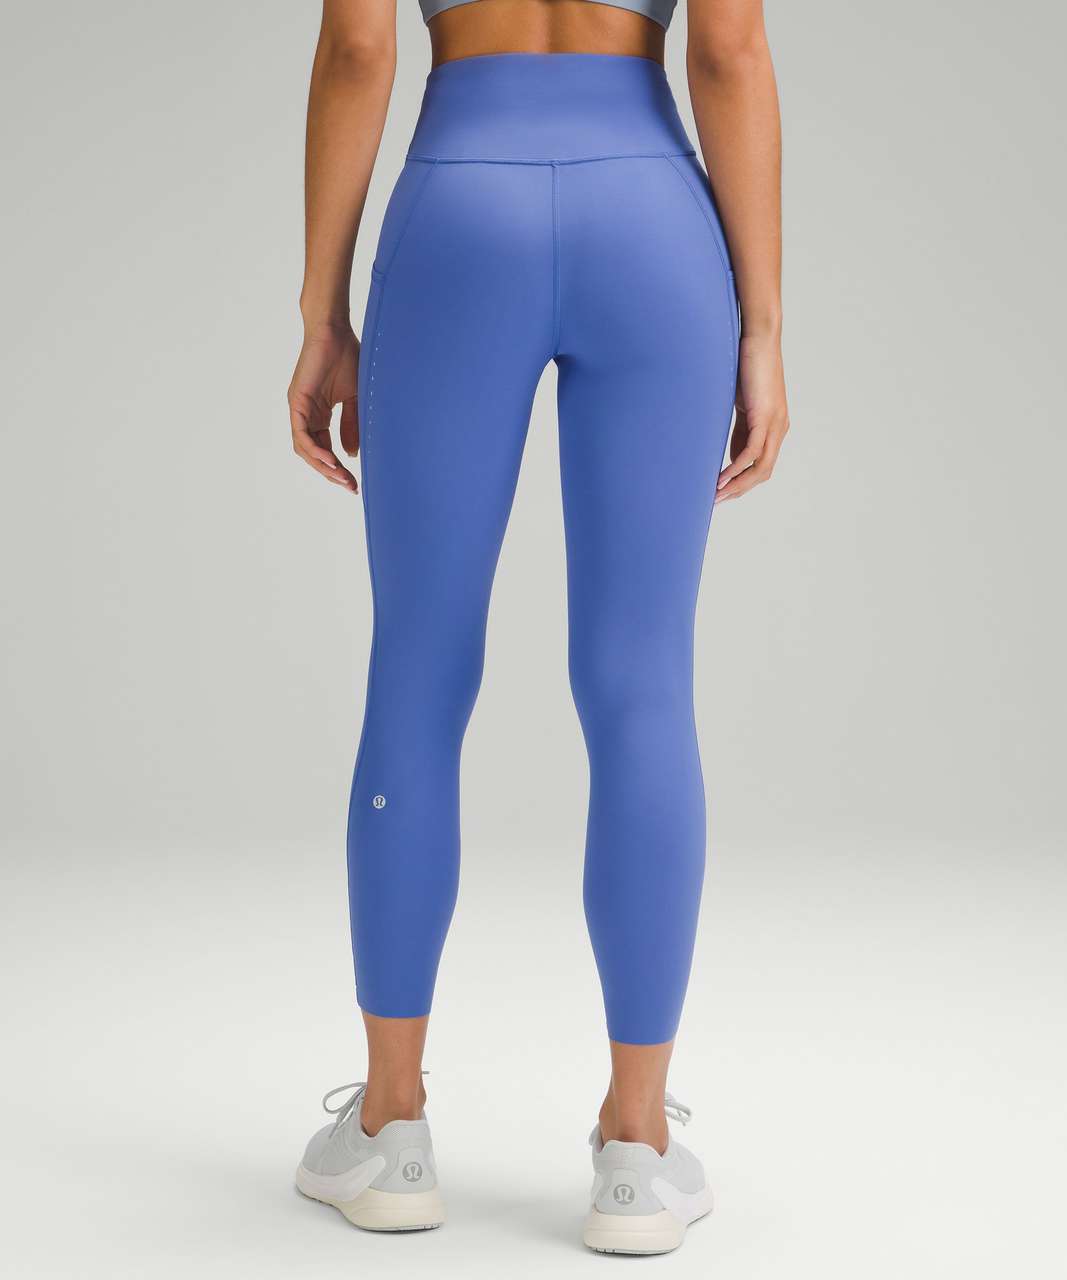 Fast and Free Tight 25 Reflective Nulux, City Grit White Blue Fog